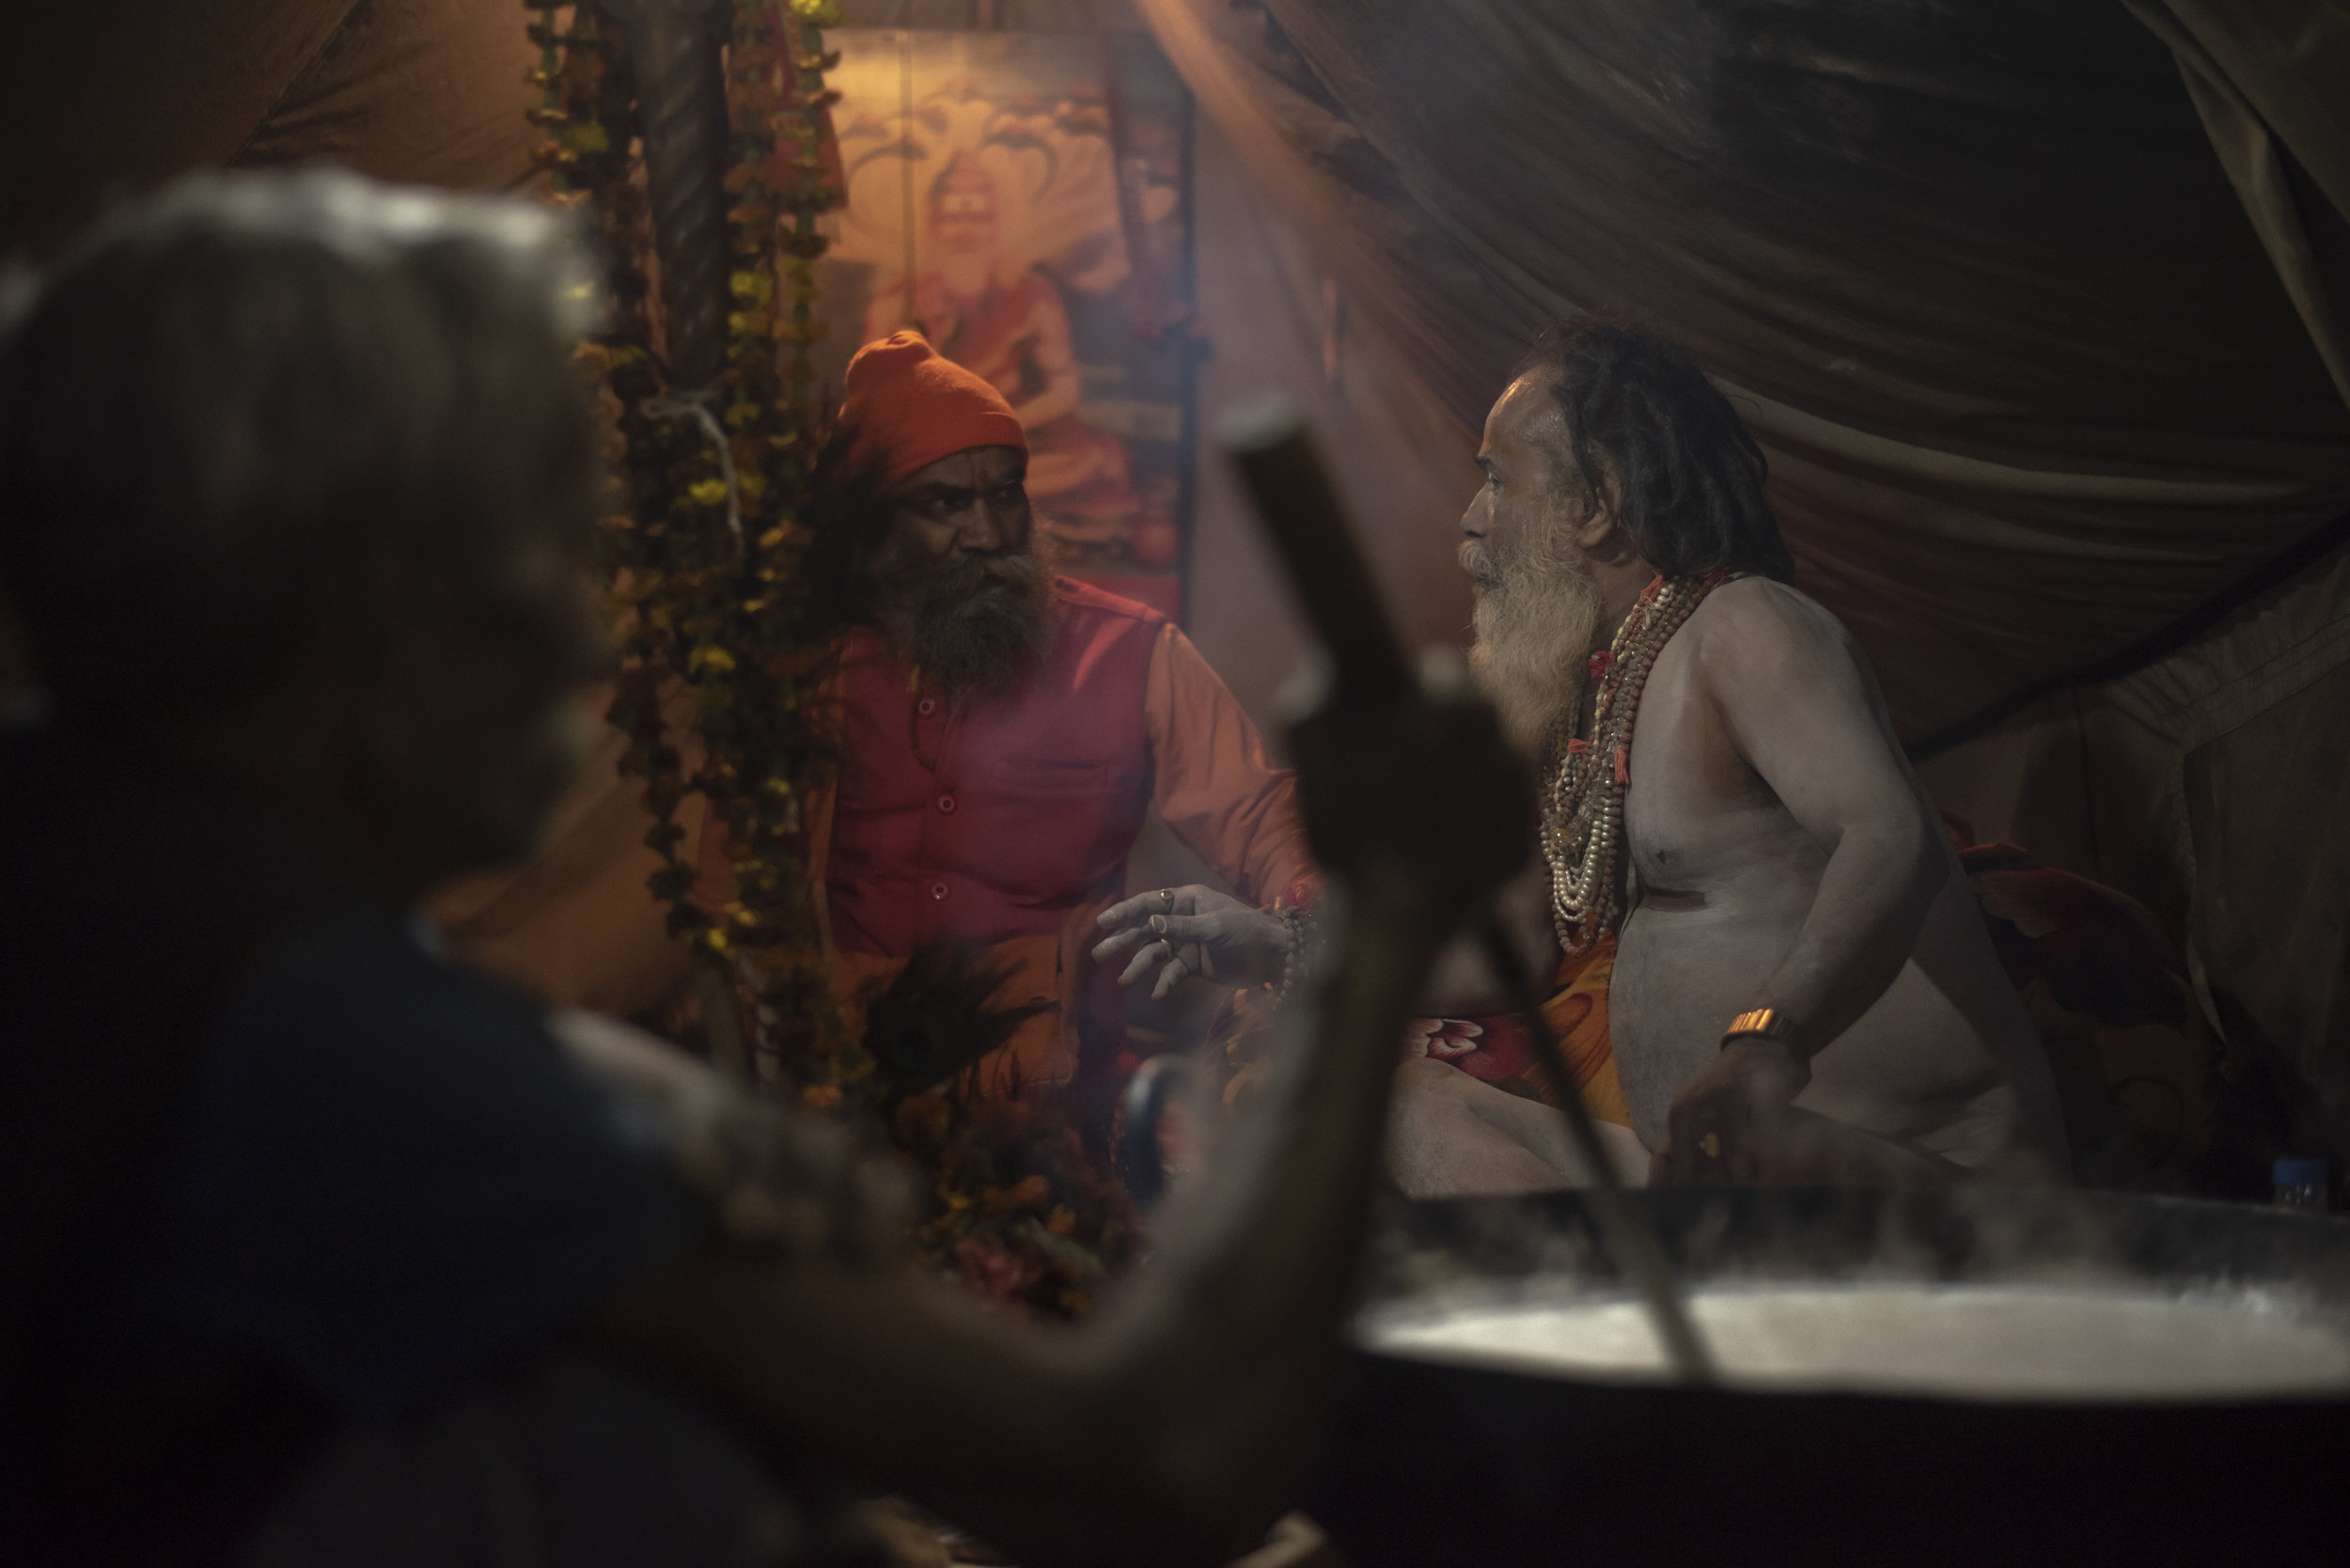  Two sadhu’s (Hindu sages/priests) converse while a man stirs a giant kettle of milk representing the Samudra Manthan, an auspicious ocean of milk from Vedic mythology. This scene, peppered with religious symbolism, was one of countless others within